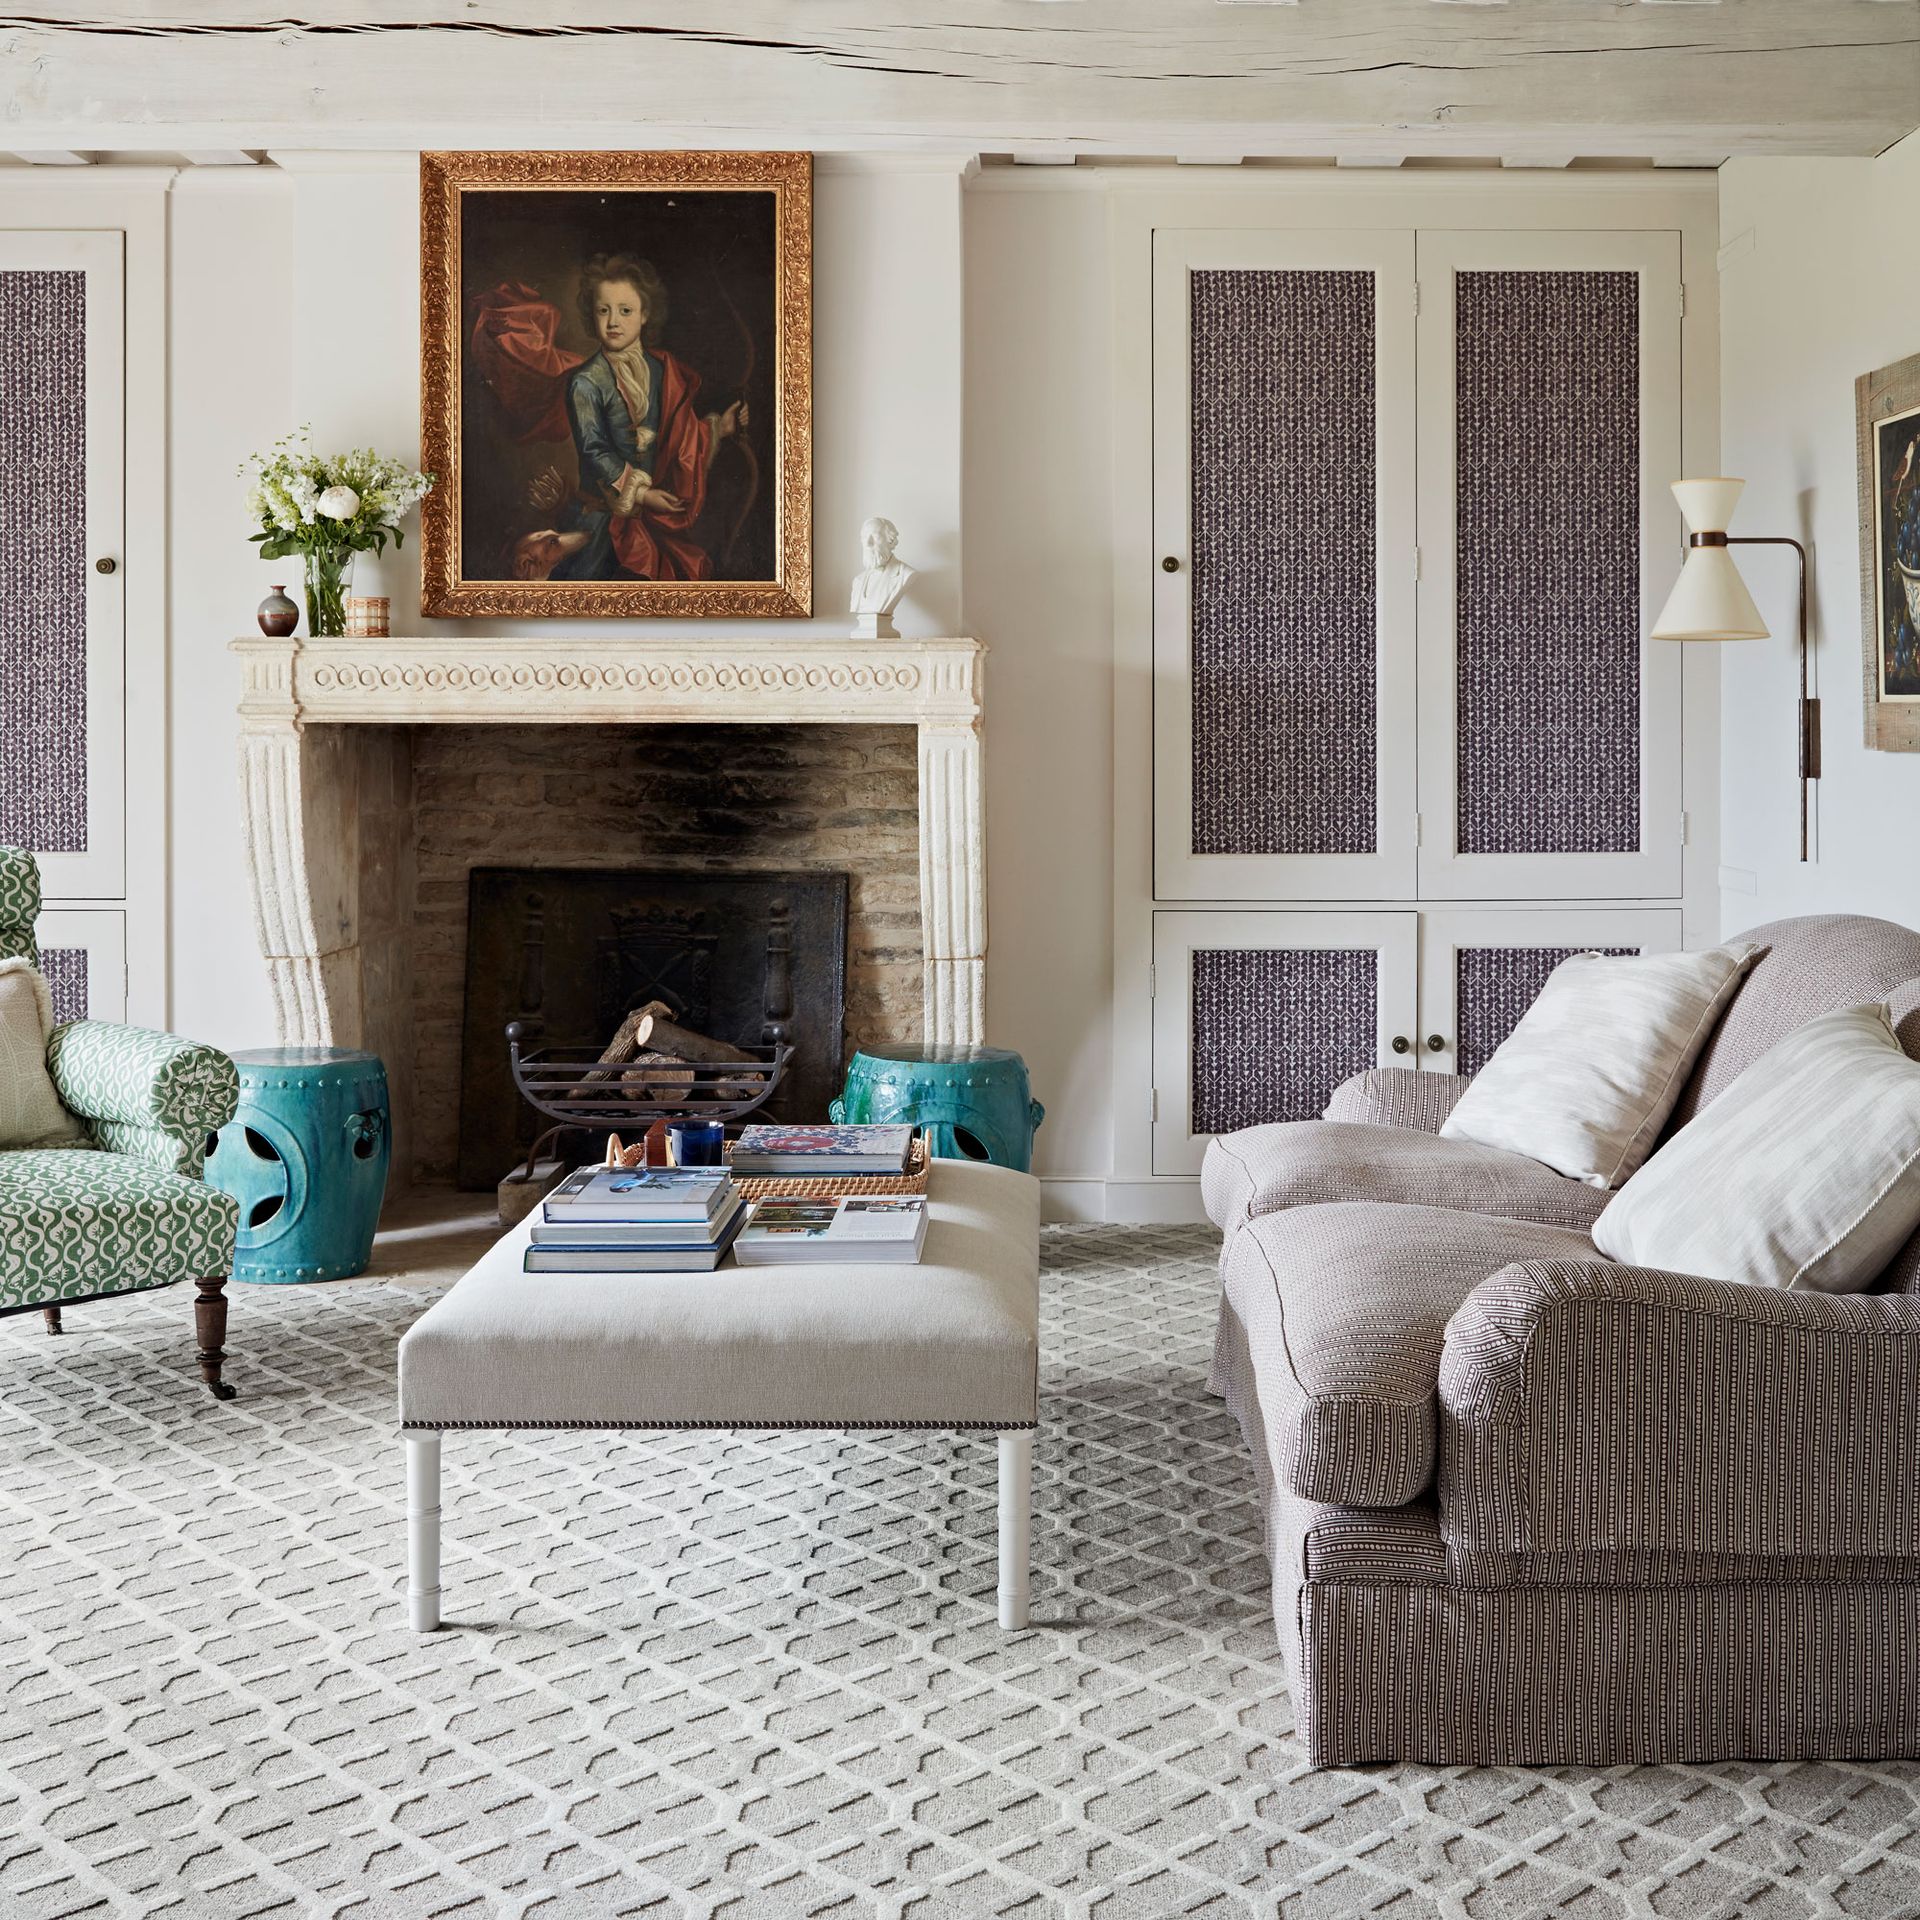 How to choose carpet - pick the best one for your home with expert ...